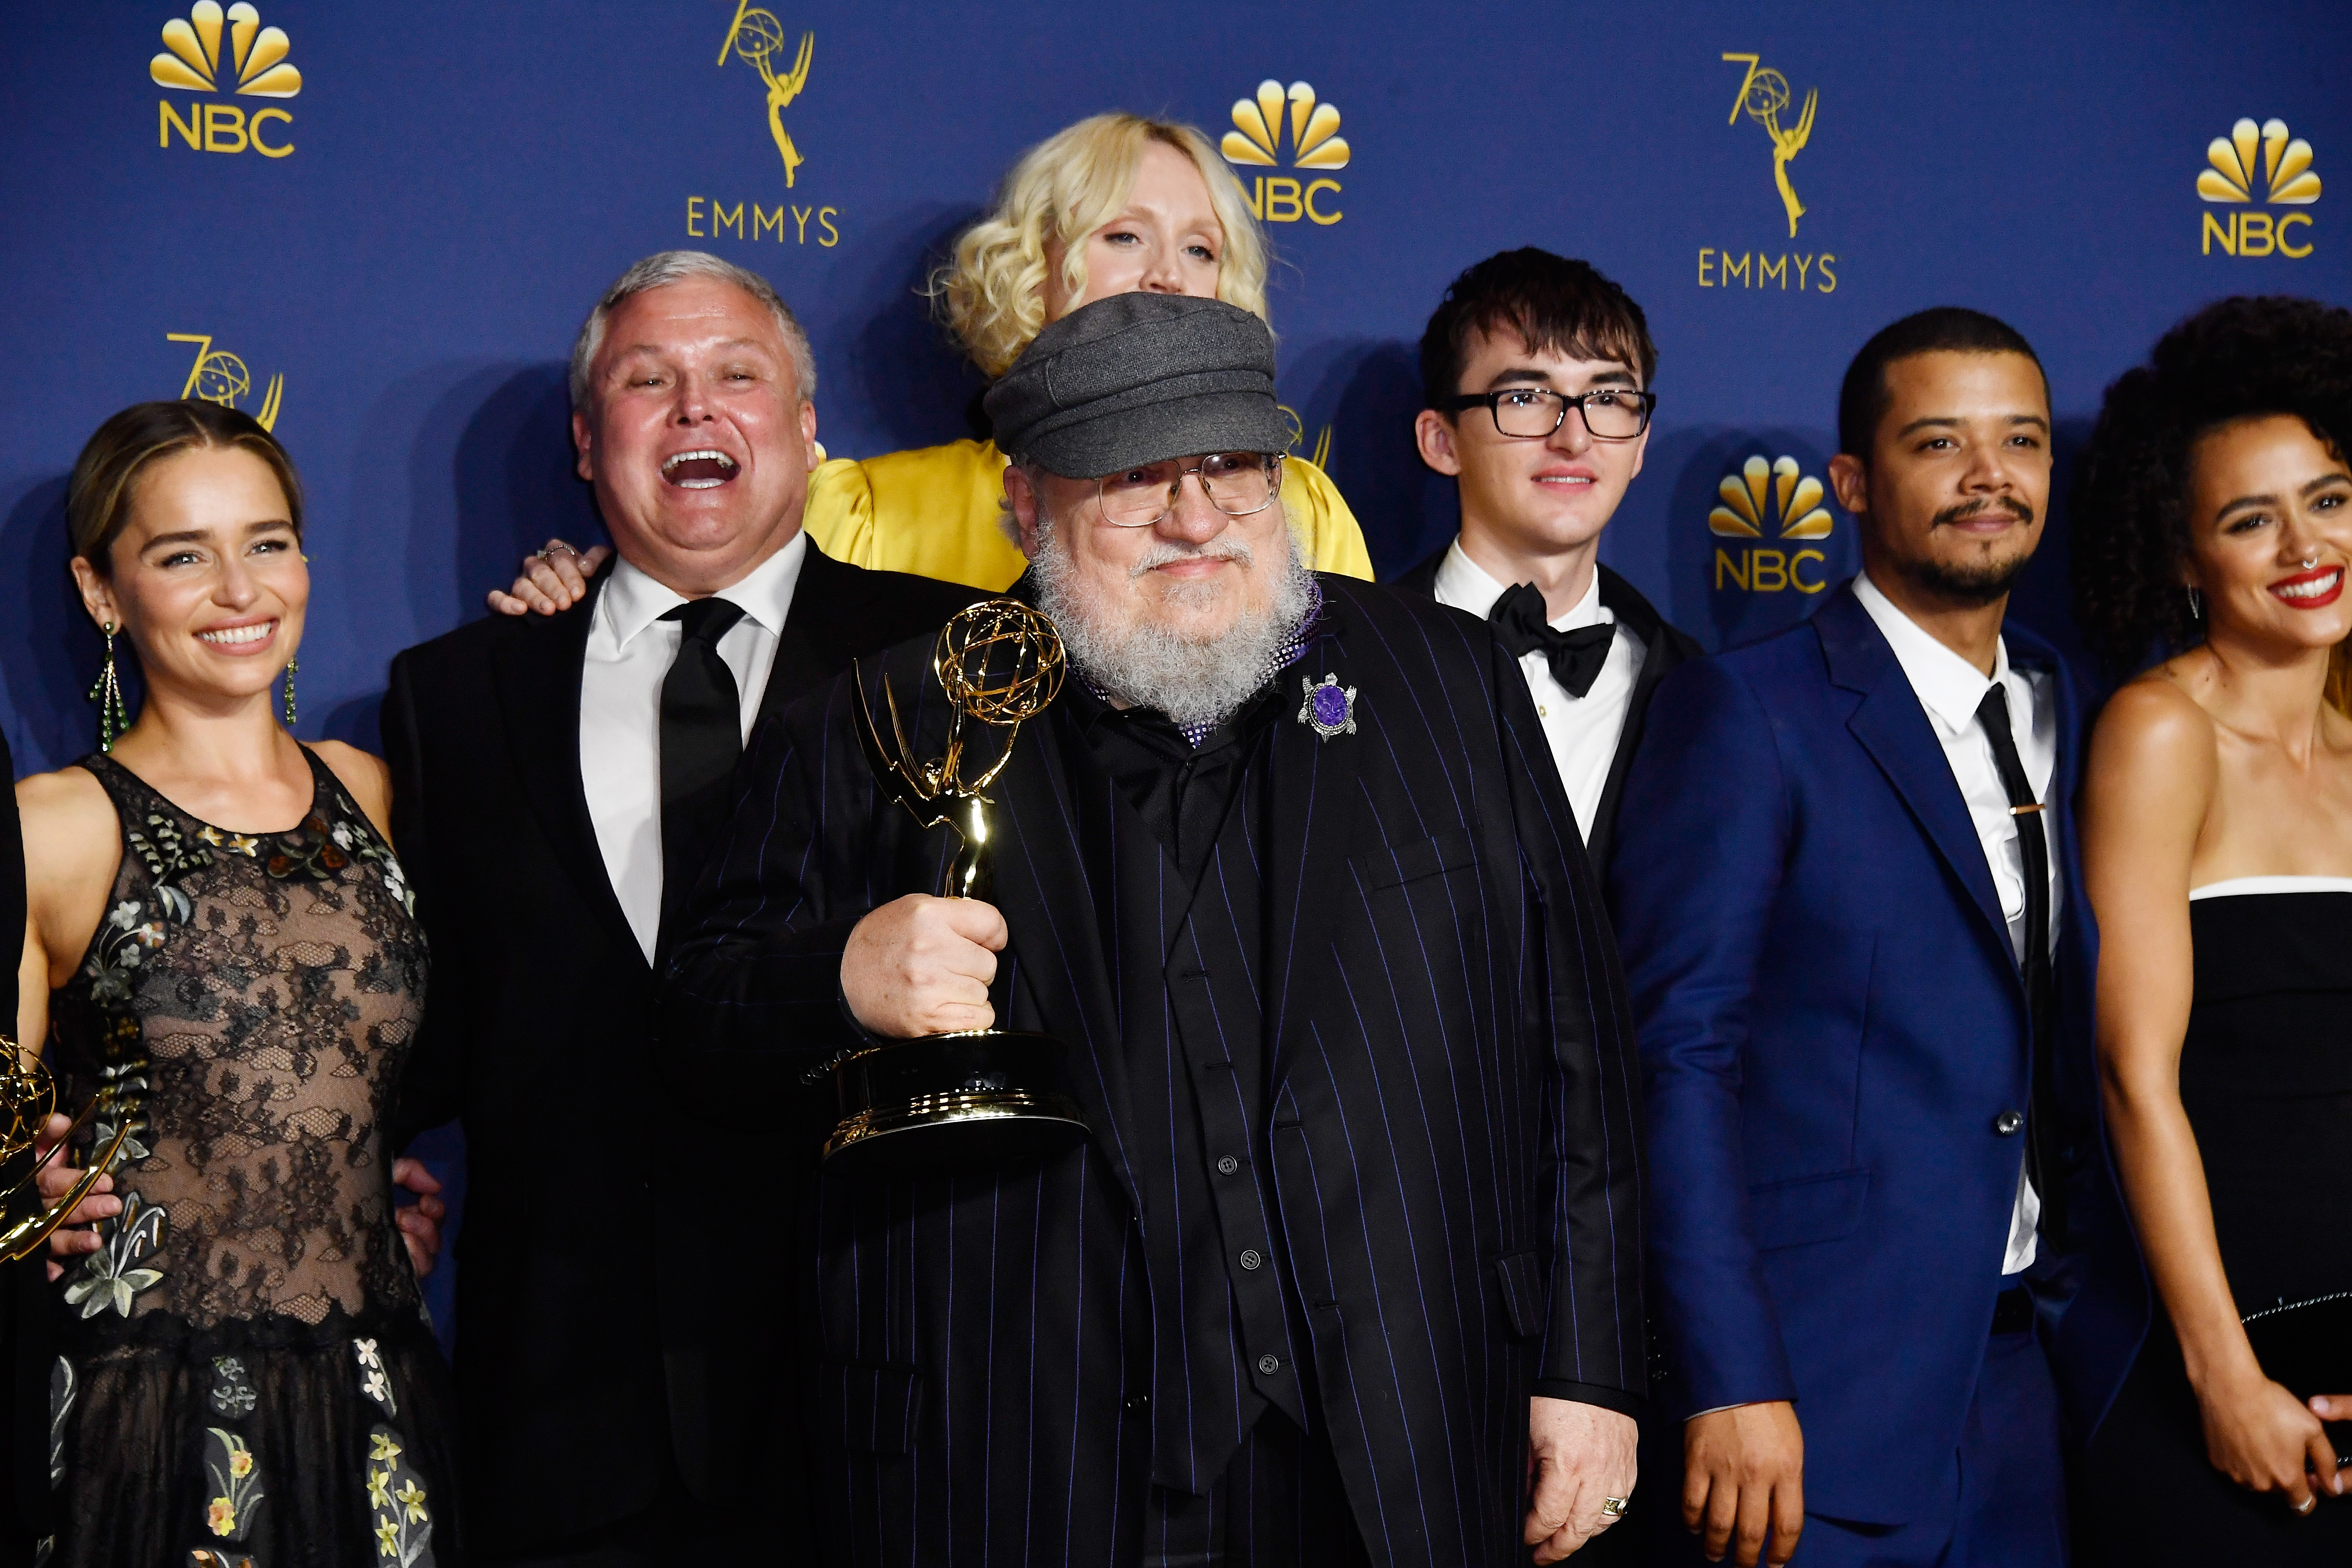 LOS ANGELES, CA - SEPTEMBER 17:  Cast and crew of Outstanding Drama Series winner 'Game of Thrones' pose in the press room during the 70th Emmy Awards at Microsoft Theater on September 17, 2018 in Los Angeles, California.  (Photo by Frazer Harrison/Getty Images)